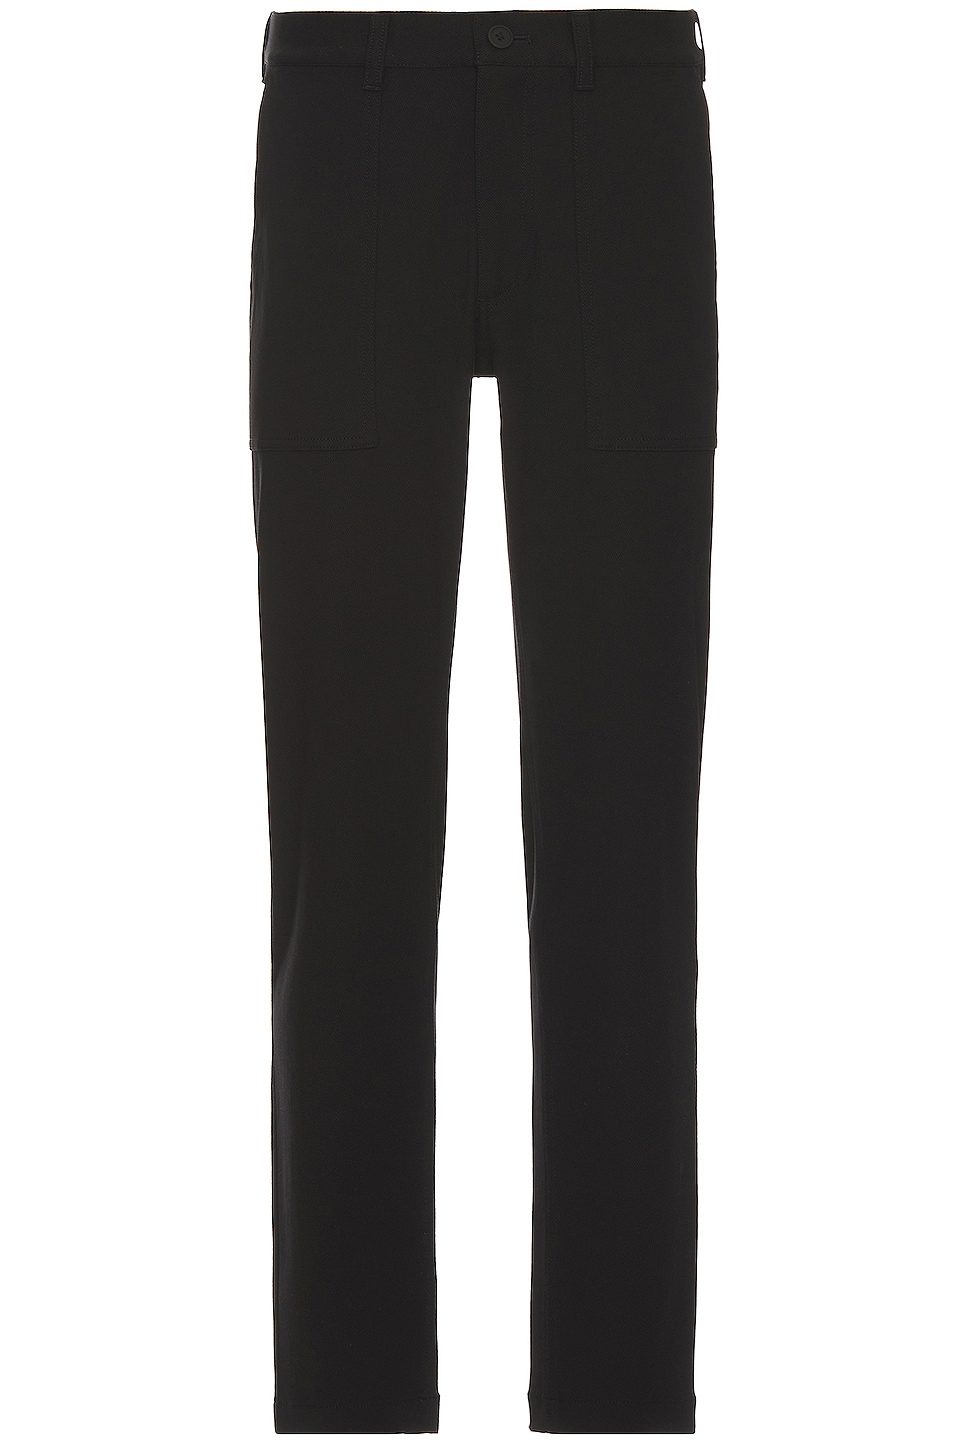 Image 1 of Theory Fatigue Pant in Baltic